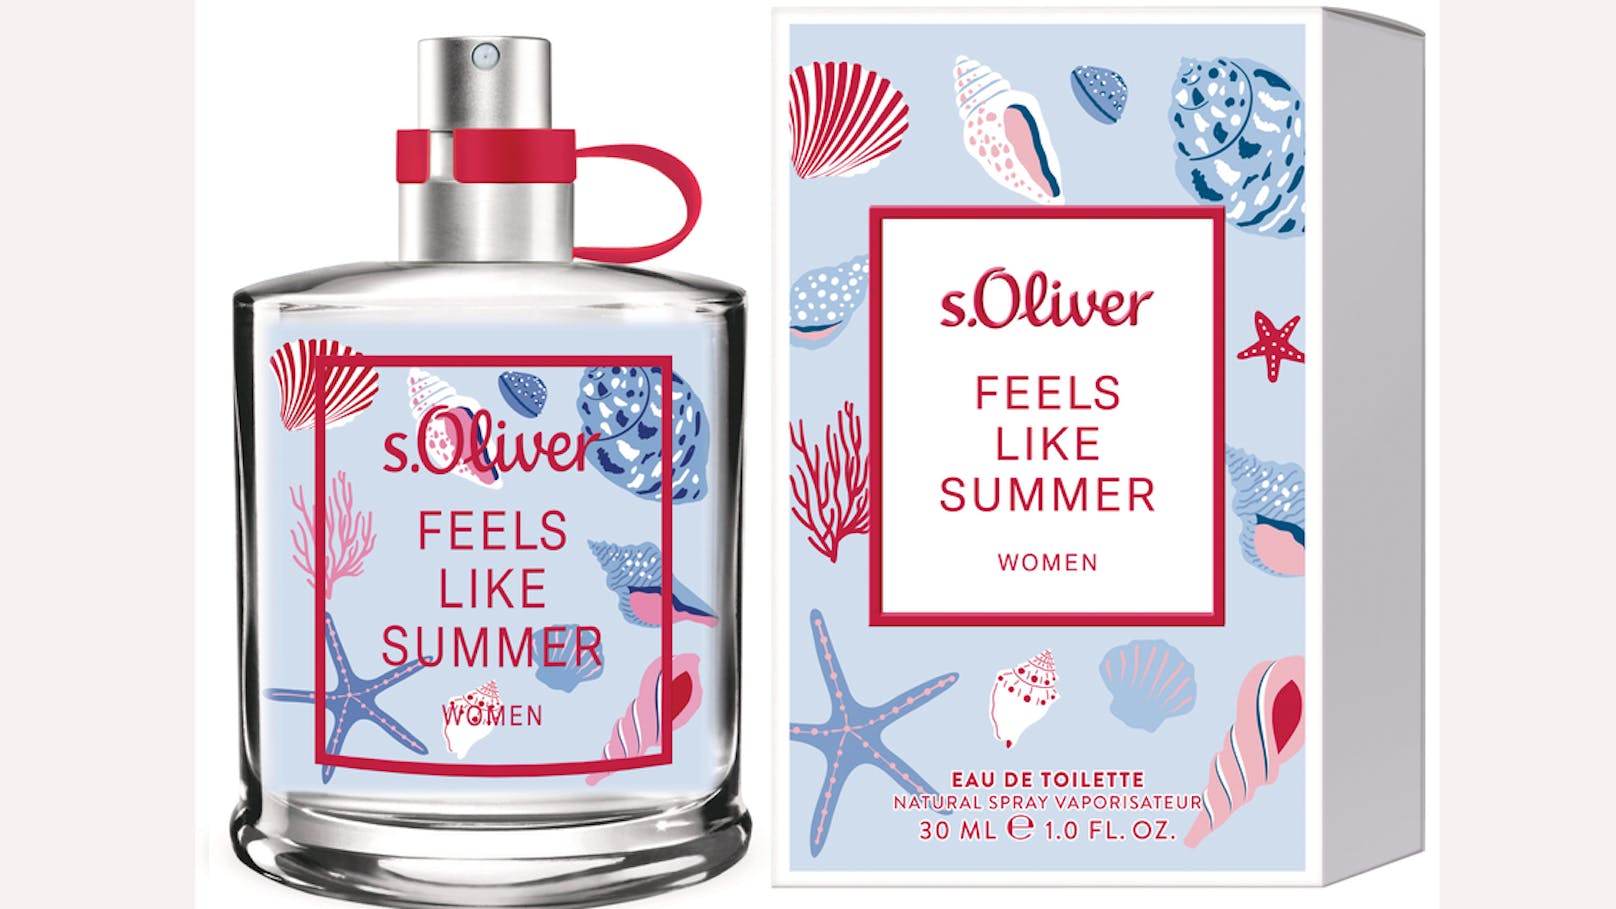 Limited Edition: "Feels like Summer" von s.Oliver!